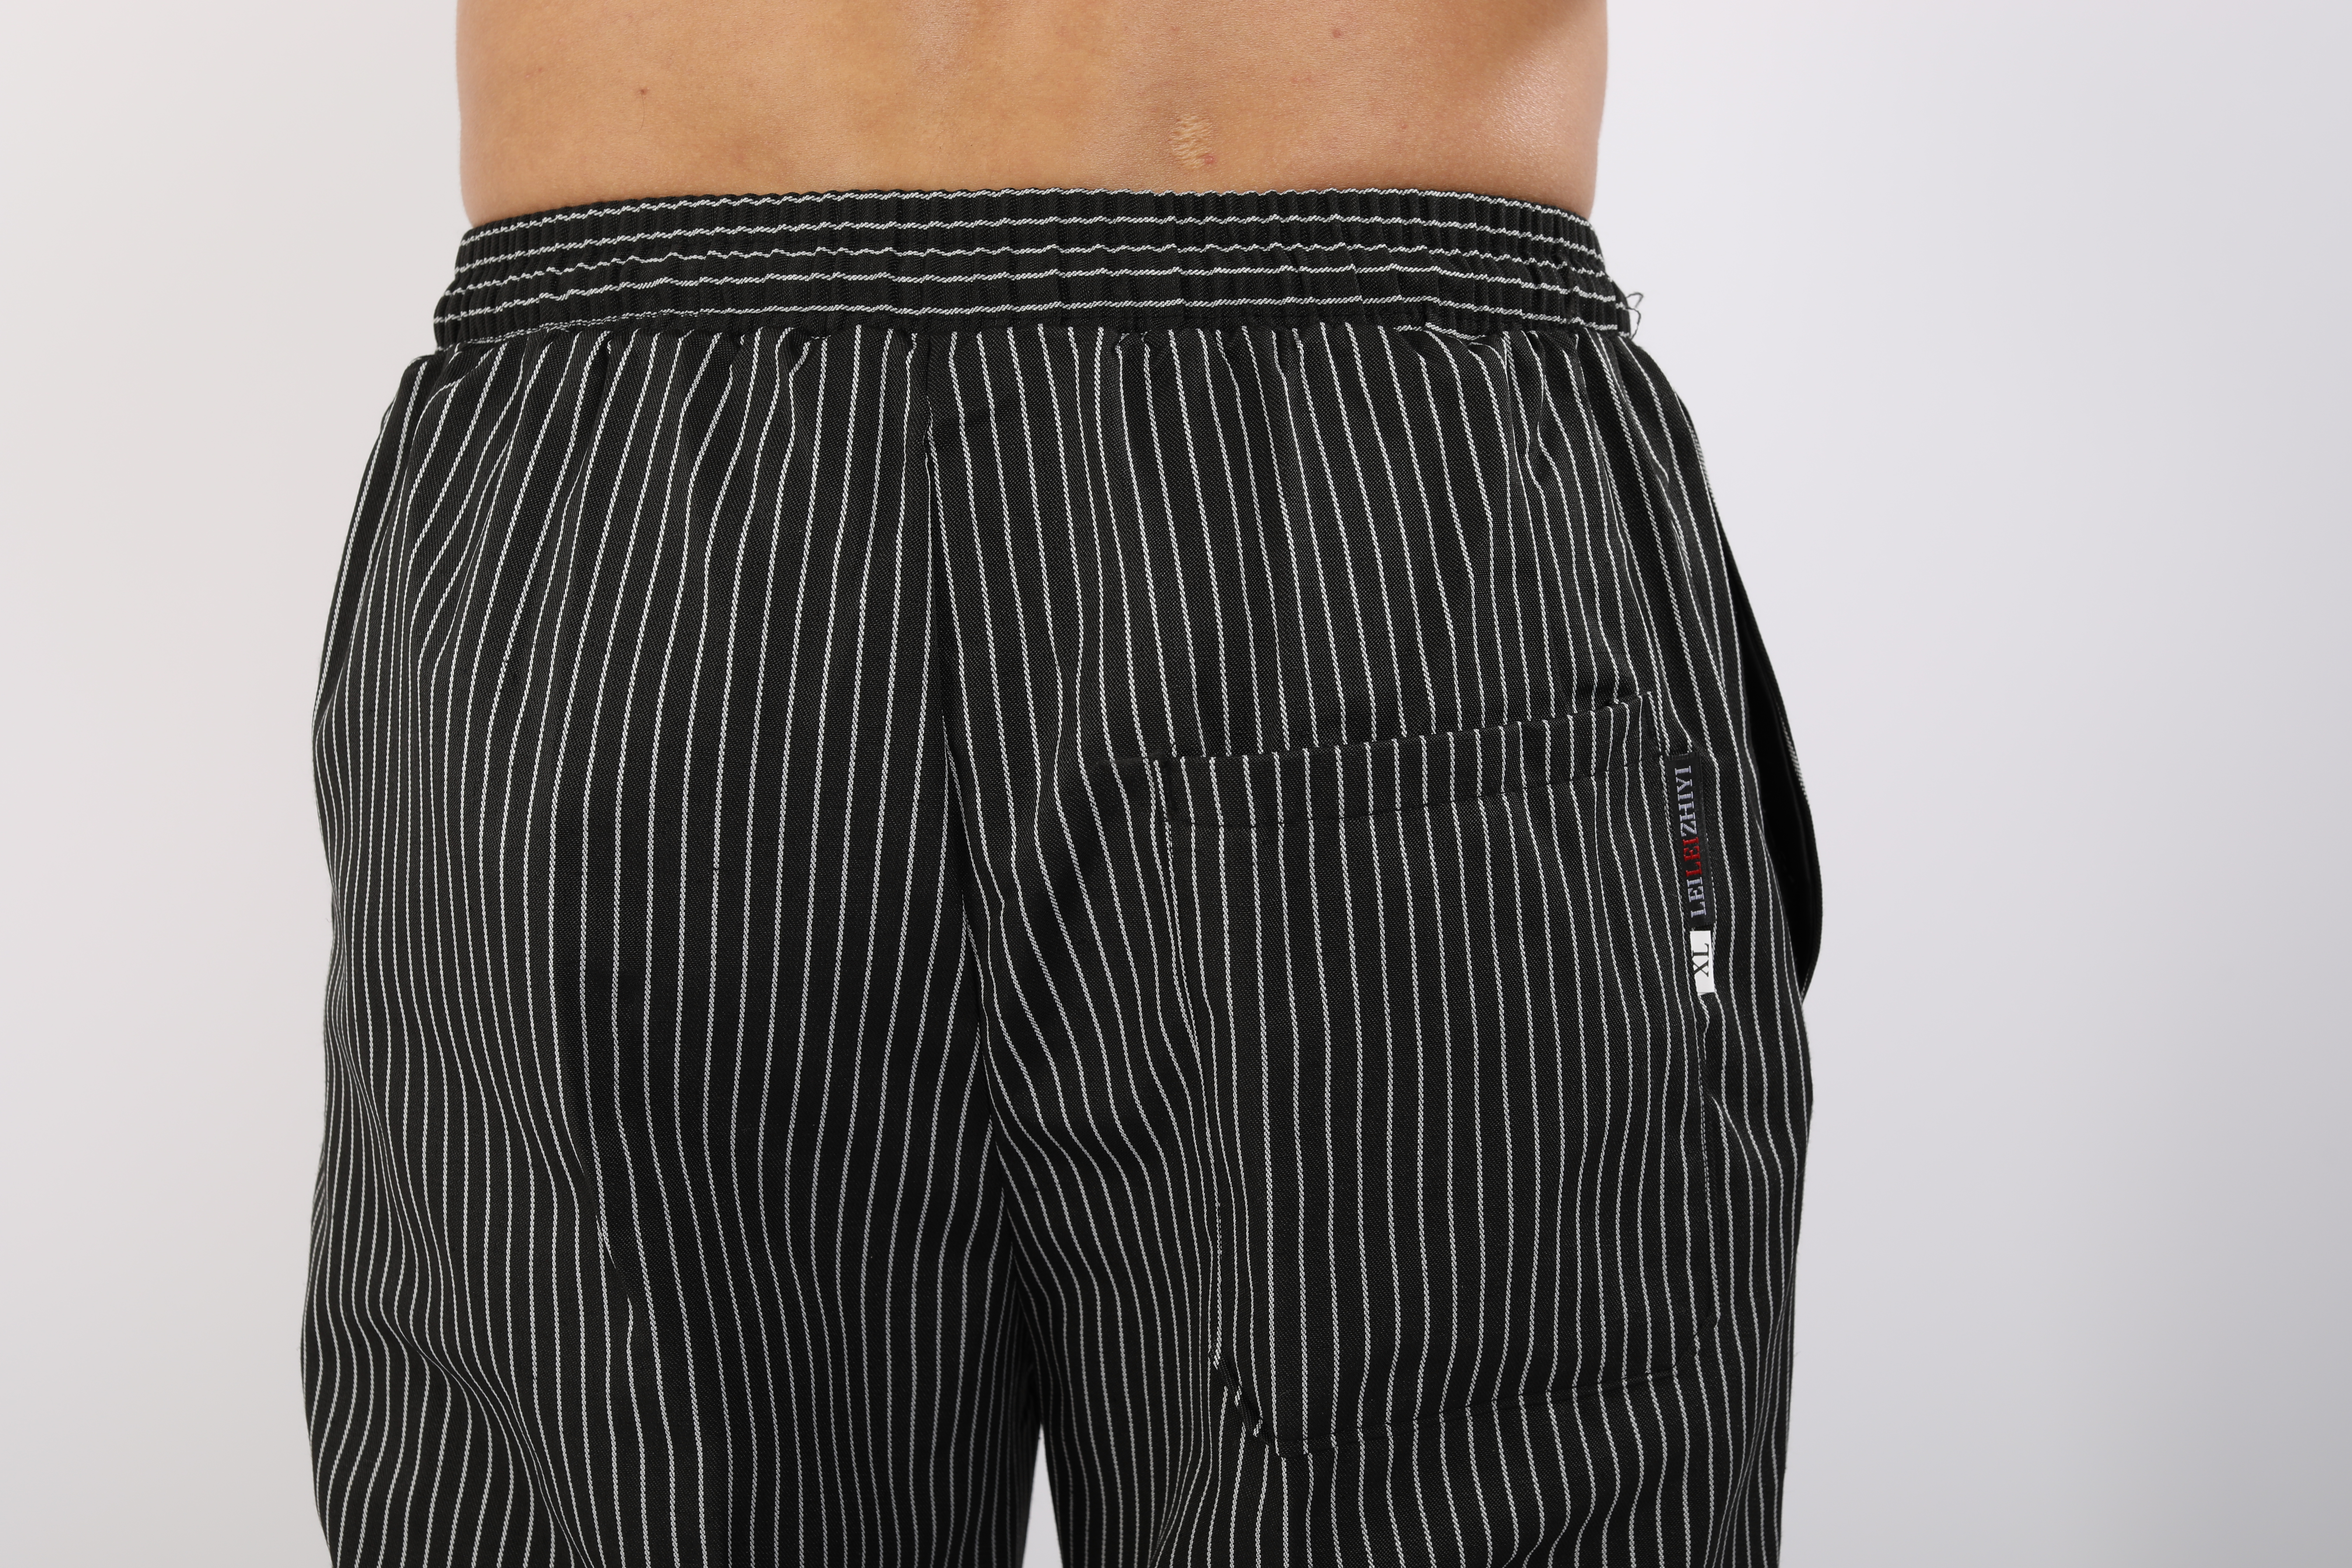 Chef Trousers LG-YBCW-1010